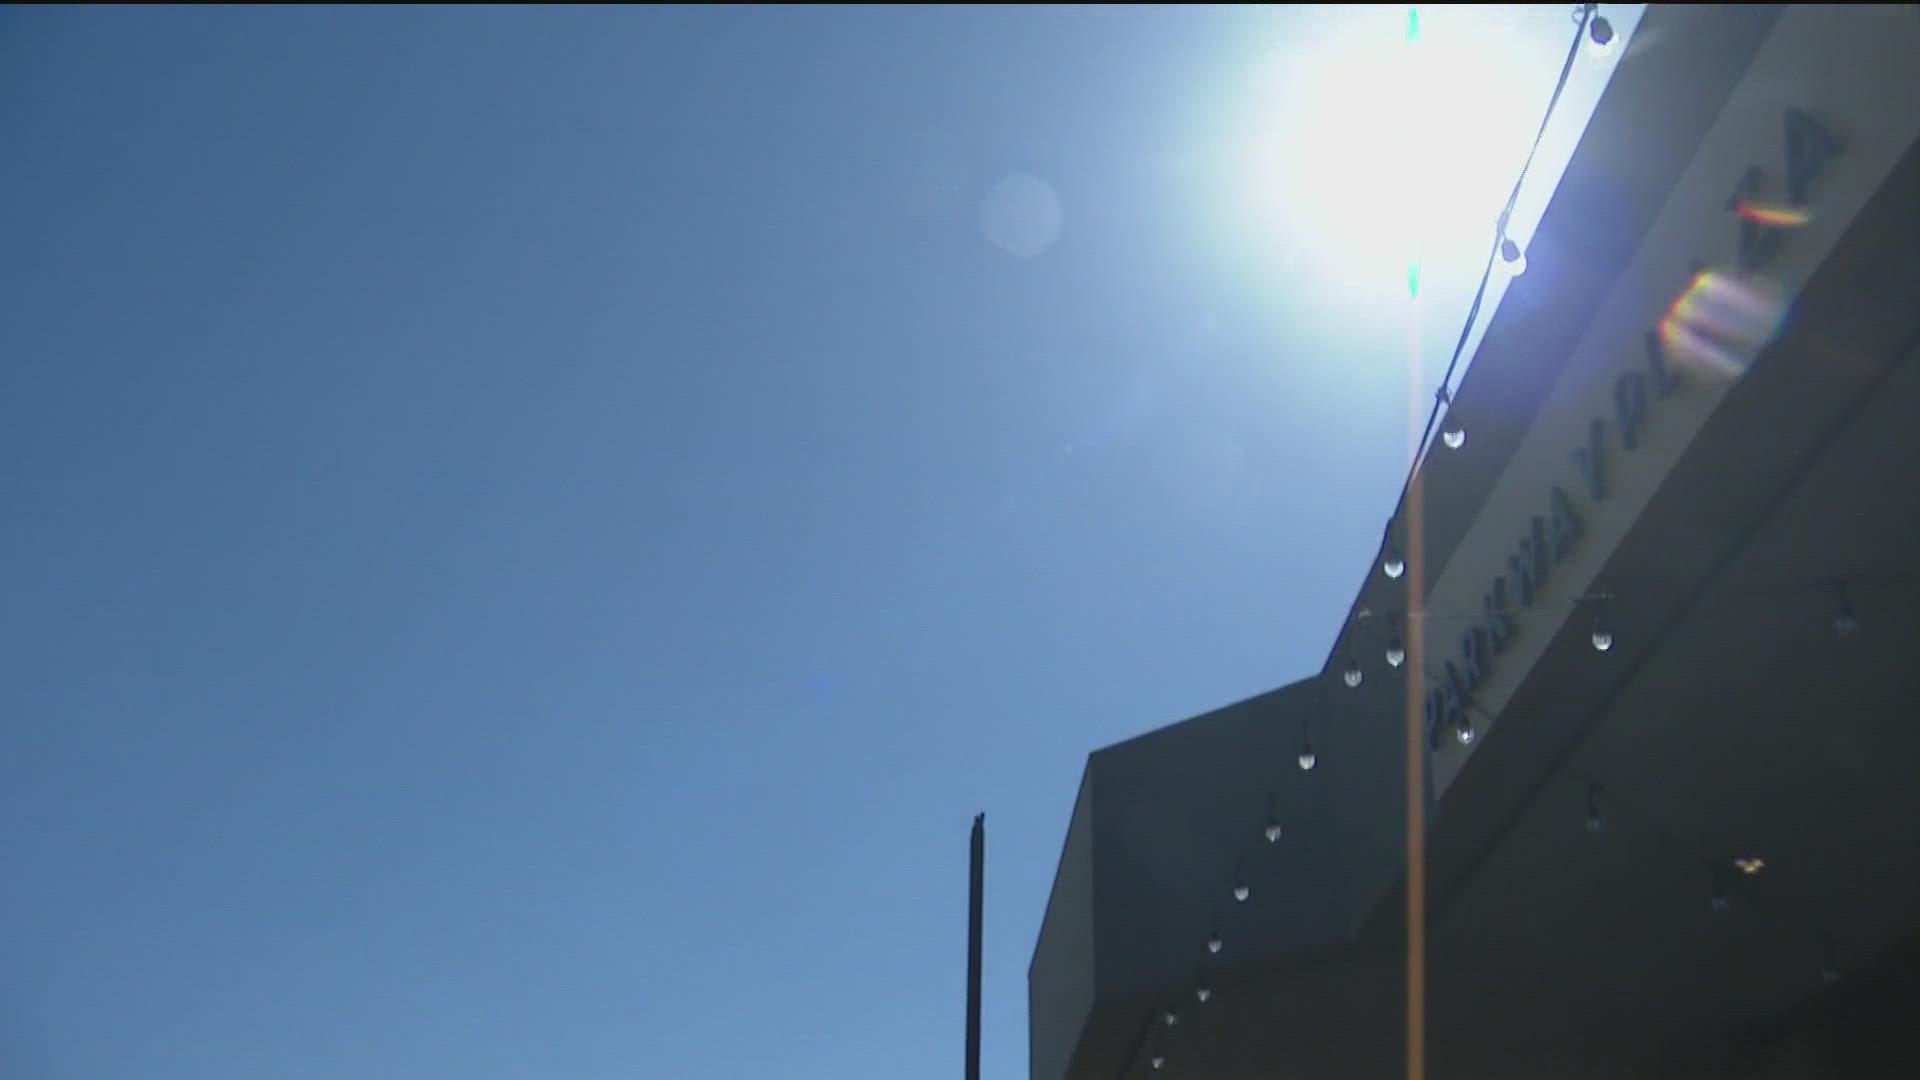 San Diego County is preparing for a prolonged heat wave lasting through the Labor Day holiday.